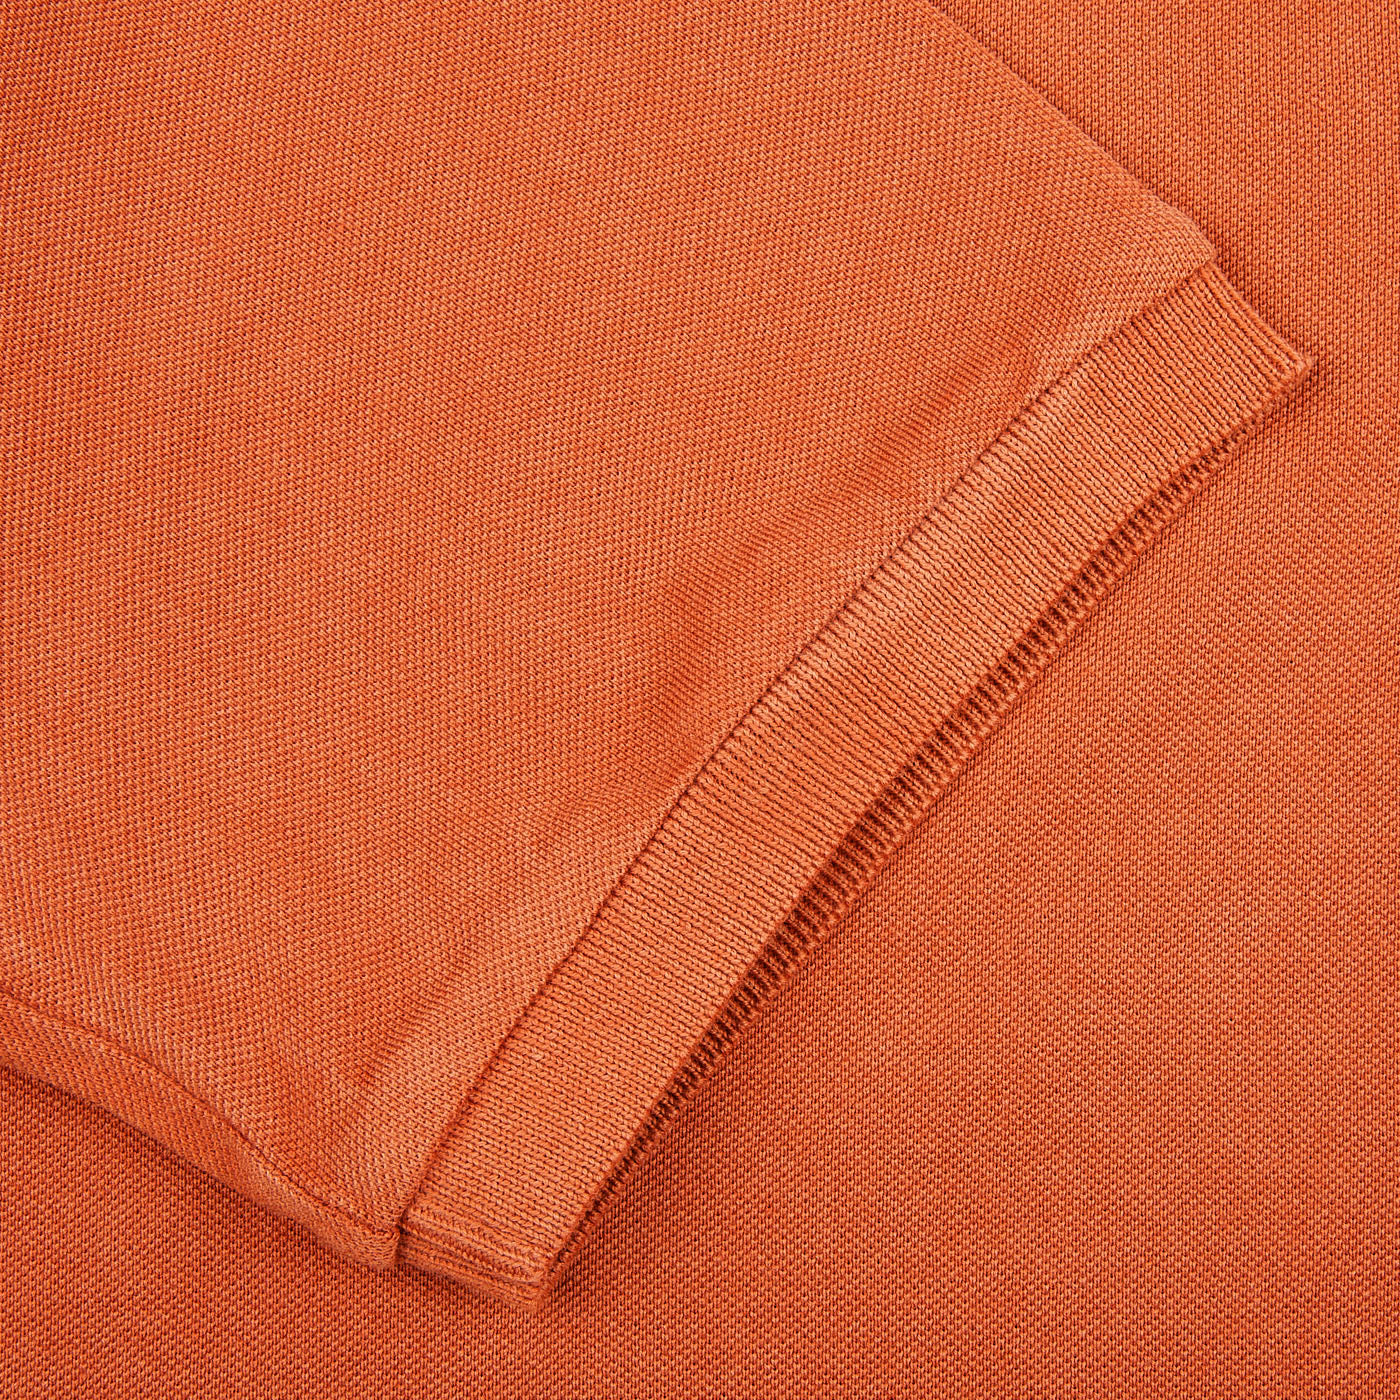 A close up of a Fedeli Washed Rust Cotton Pique Polo Shirt.